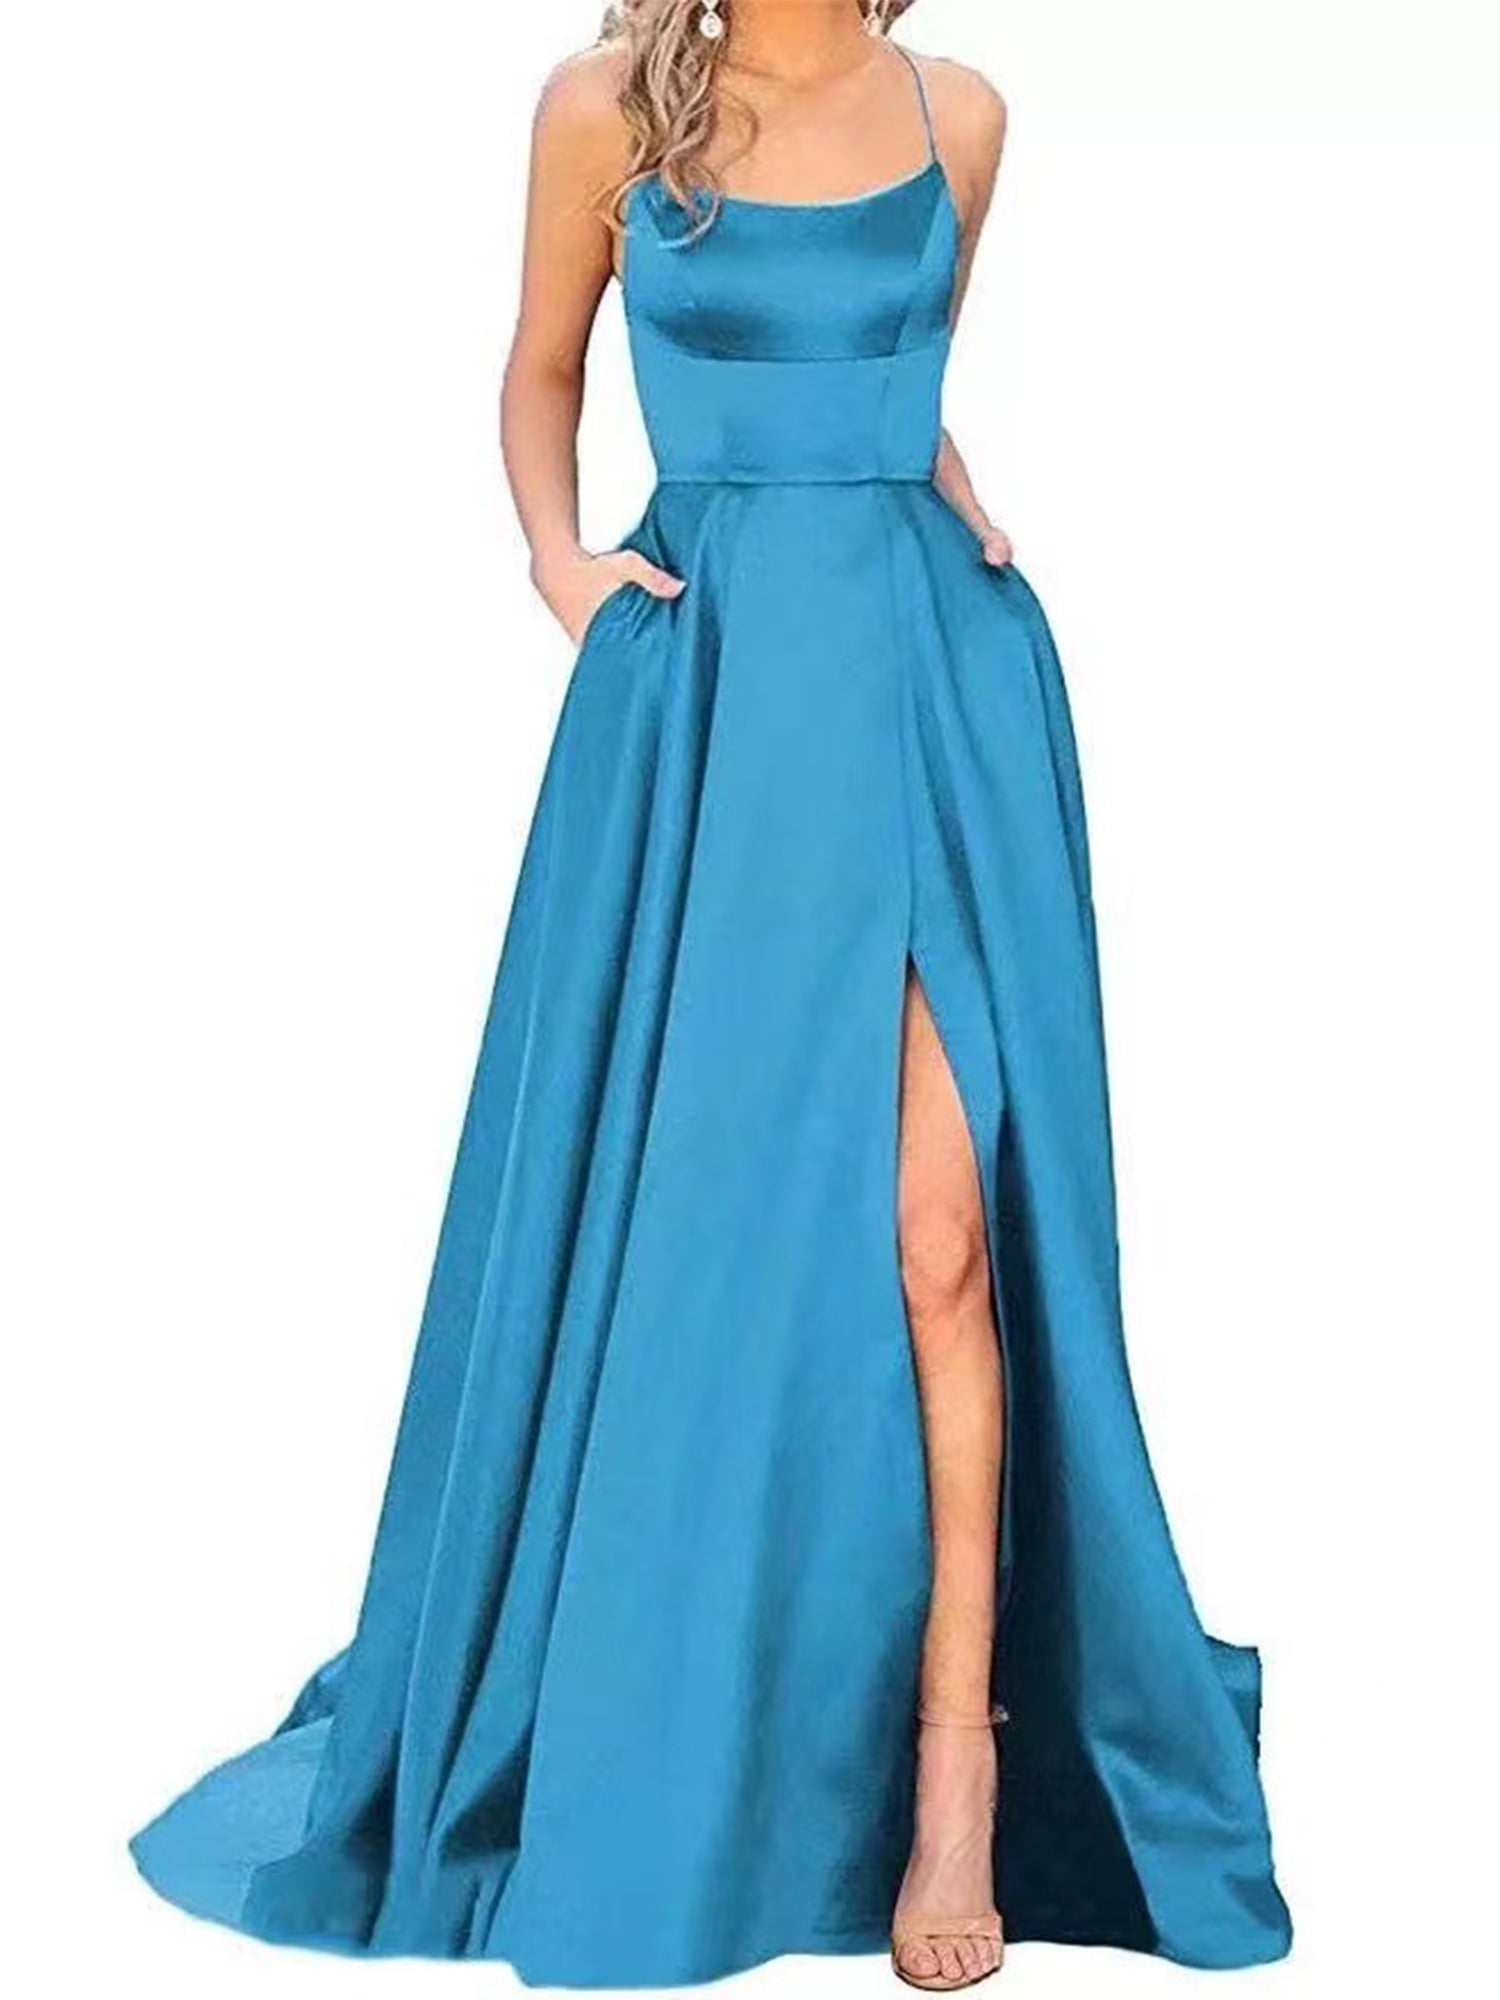 Grianlook Ladies Maxi Dresses Scoop Neck Ball Gown Sleeveless Long Dress Women Backless Sexy